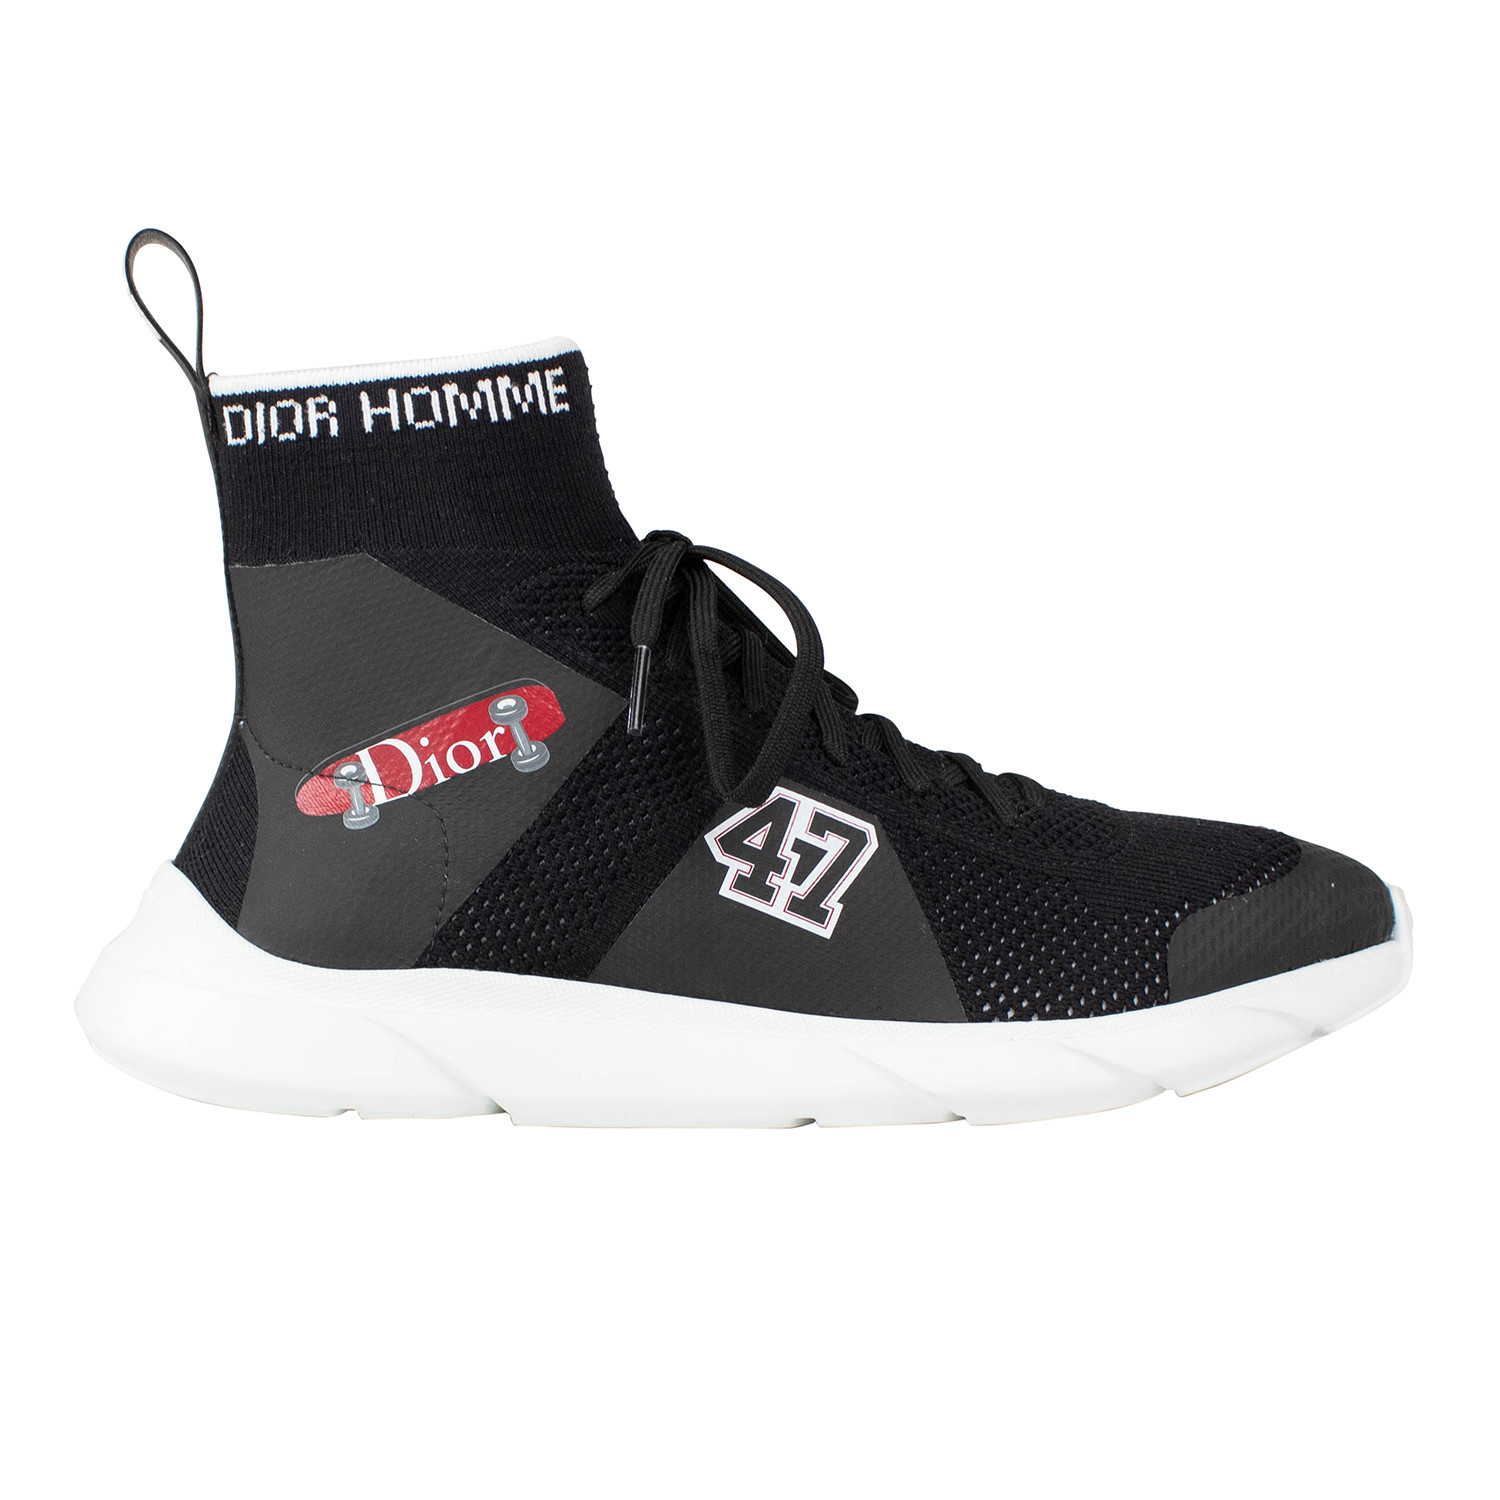 Dior Homme // Knit Lace Up B21 Sock Sneakers // Black (US: 8 